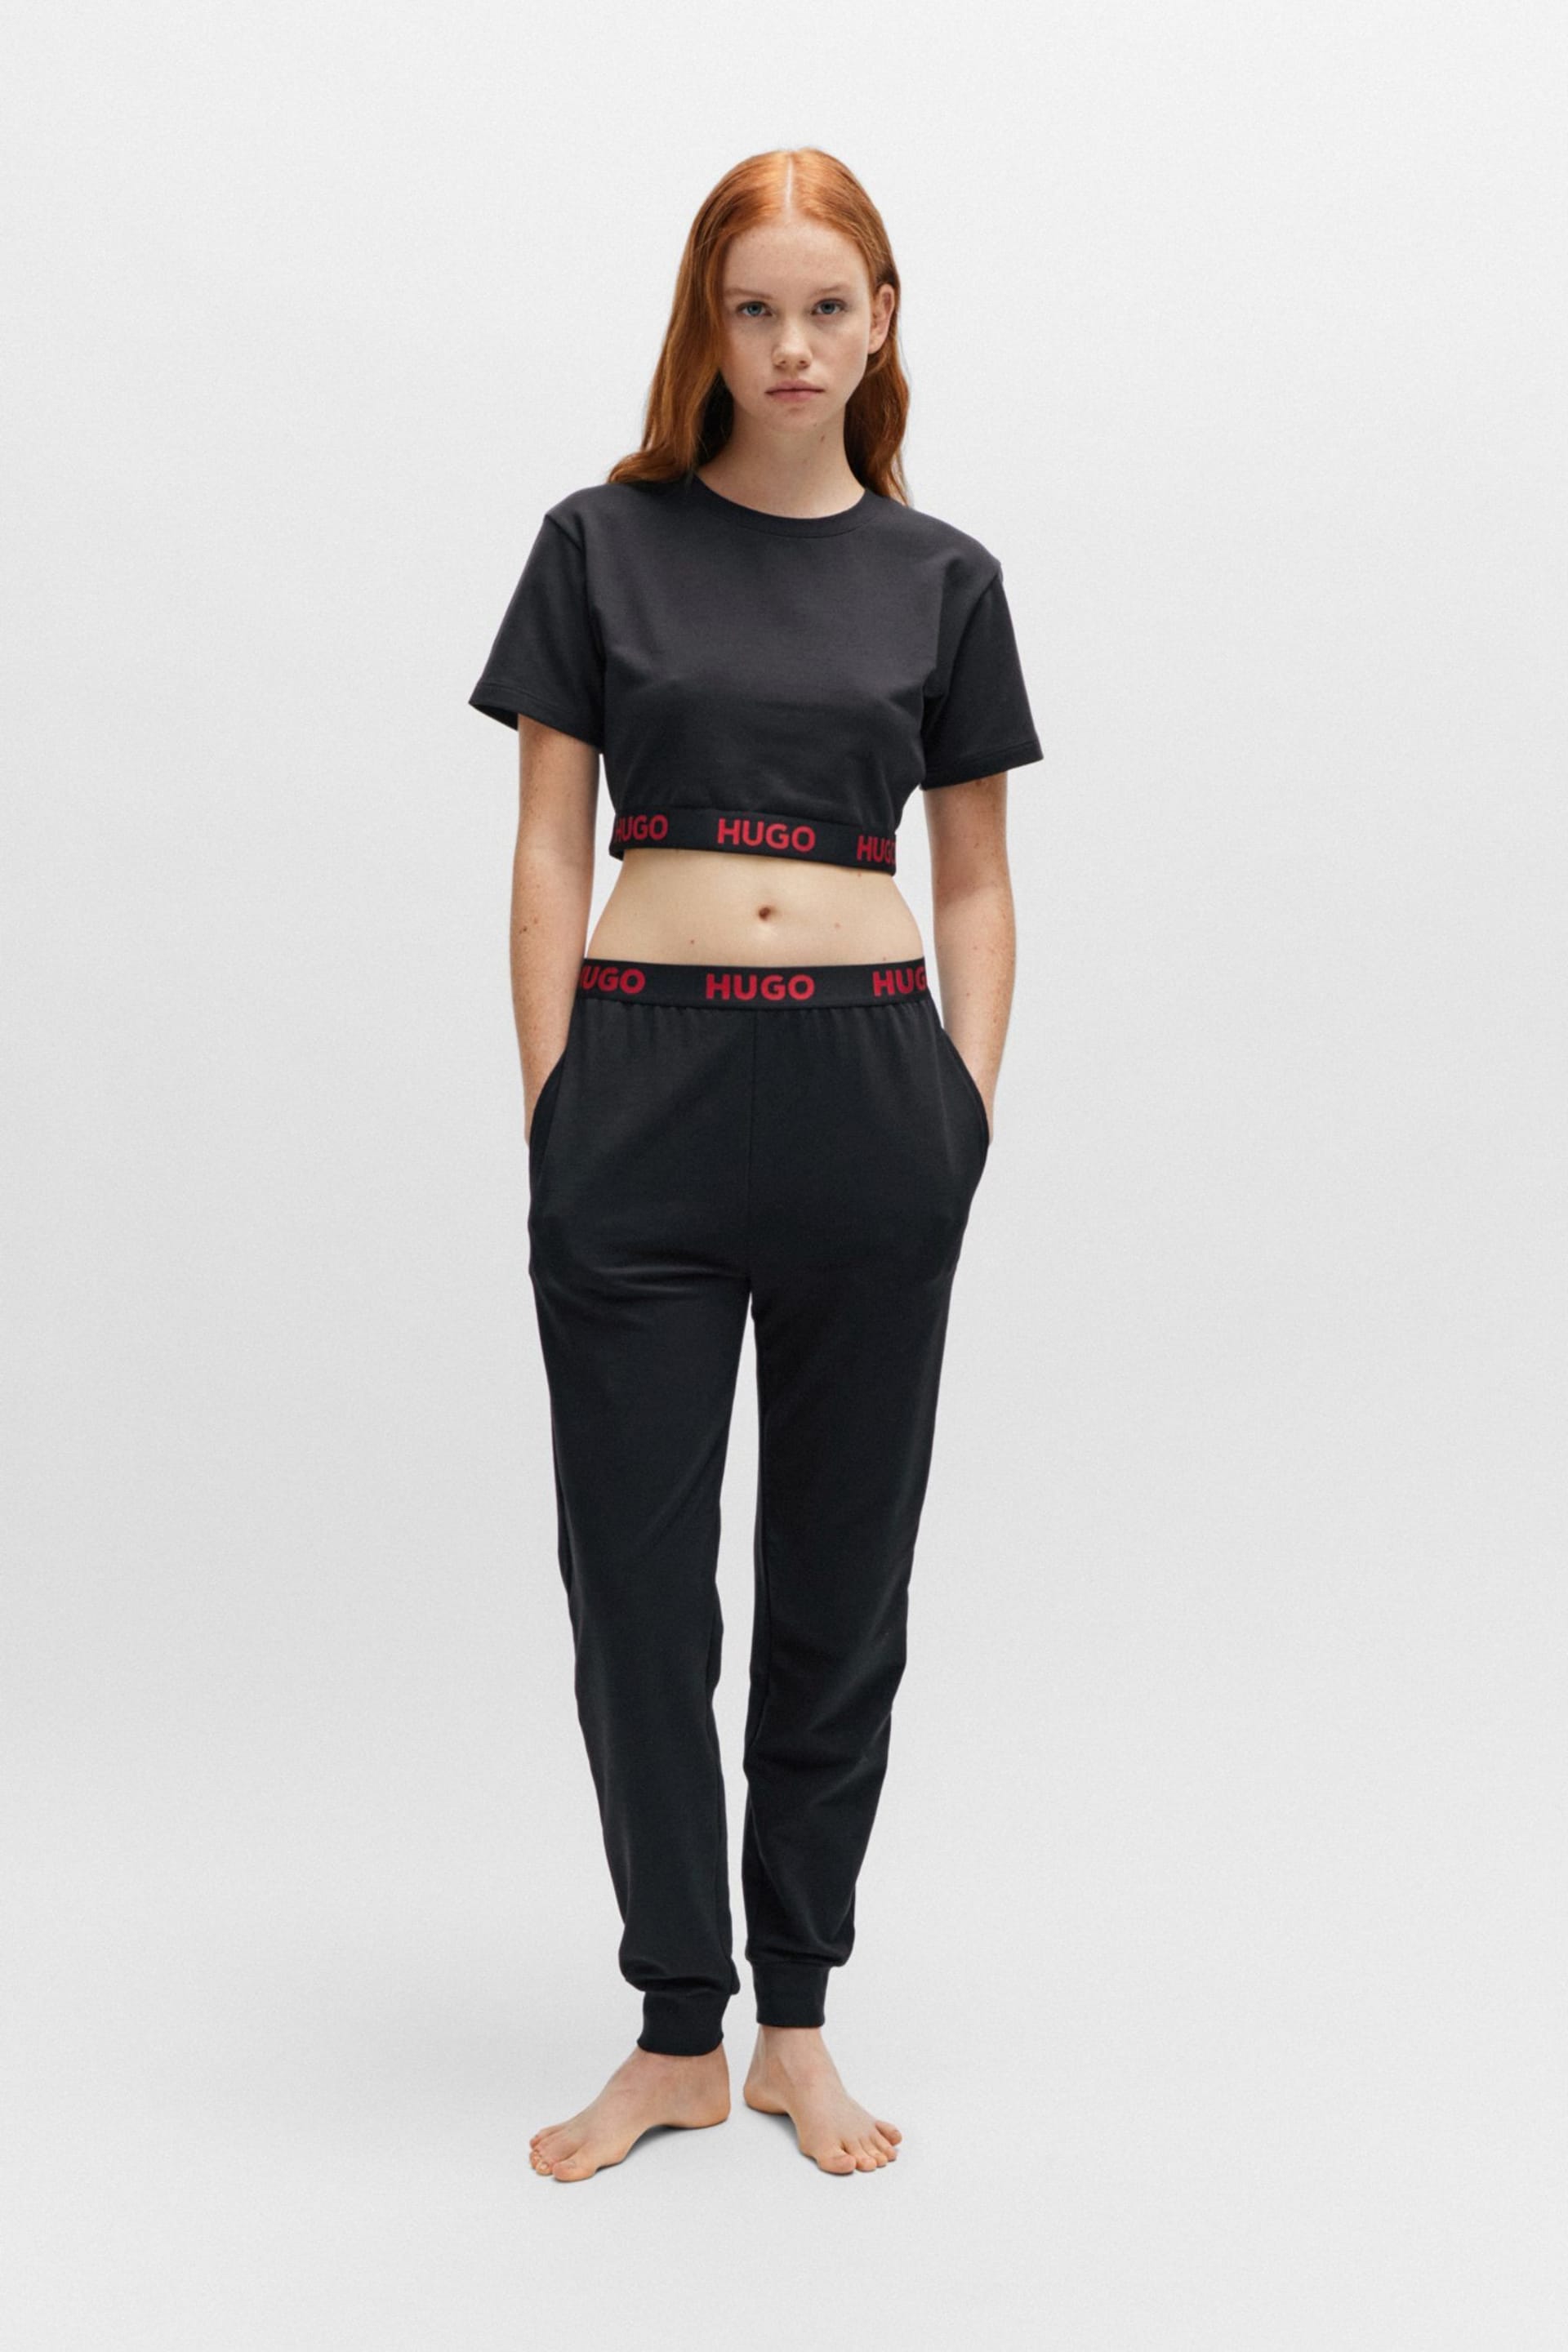 HUGO Cropped Black T-Shirt in Stretch Fabric With Logo Waistband Crop Top - Image 4 of 6